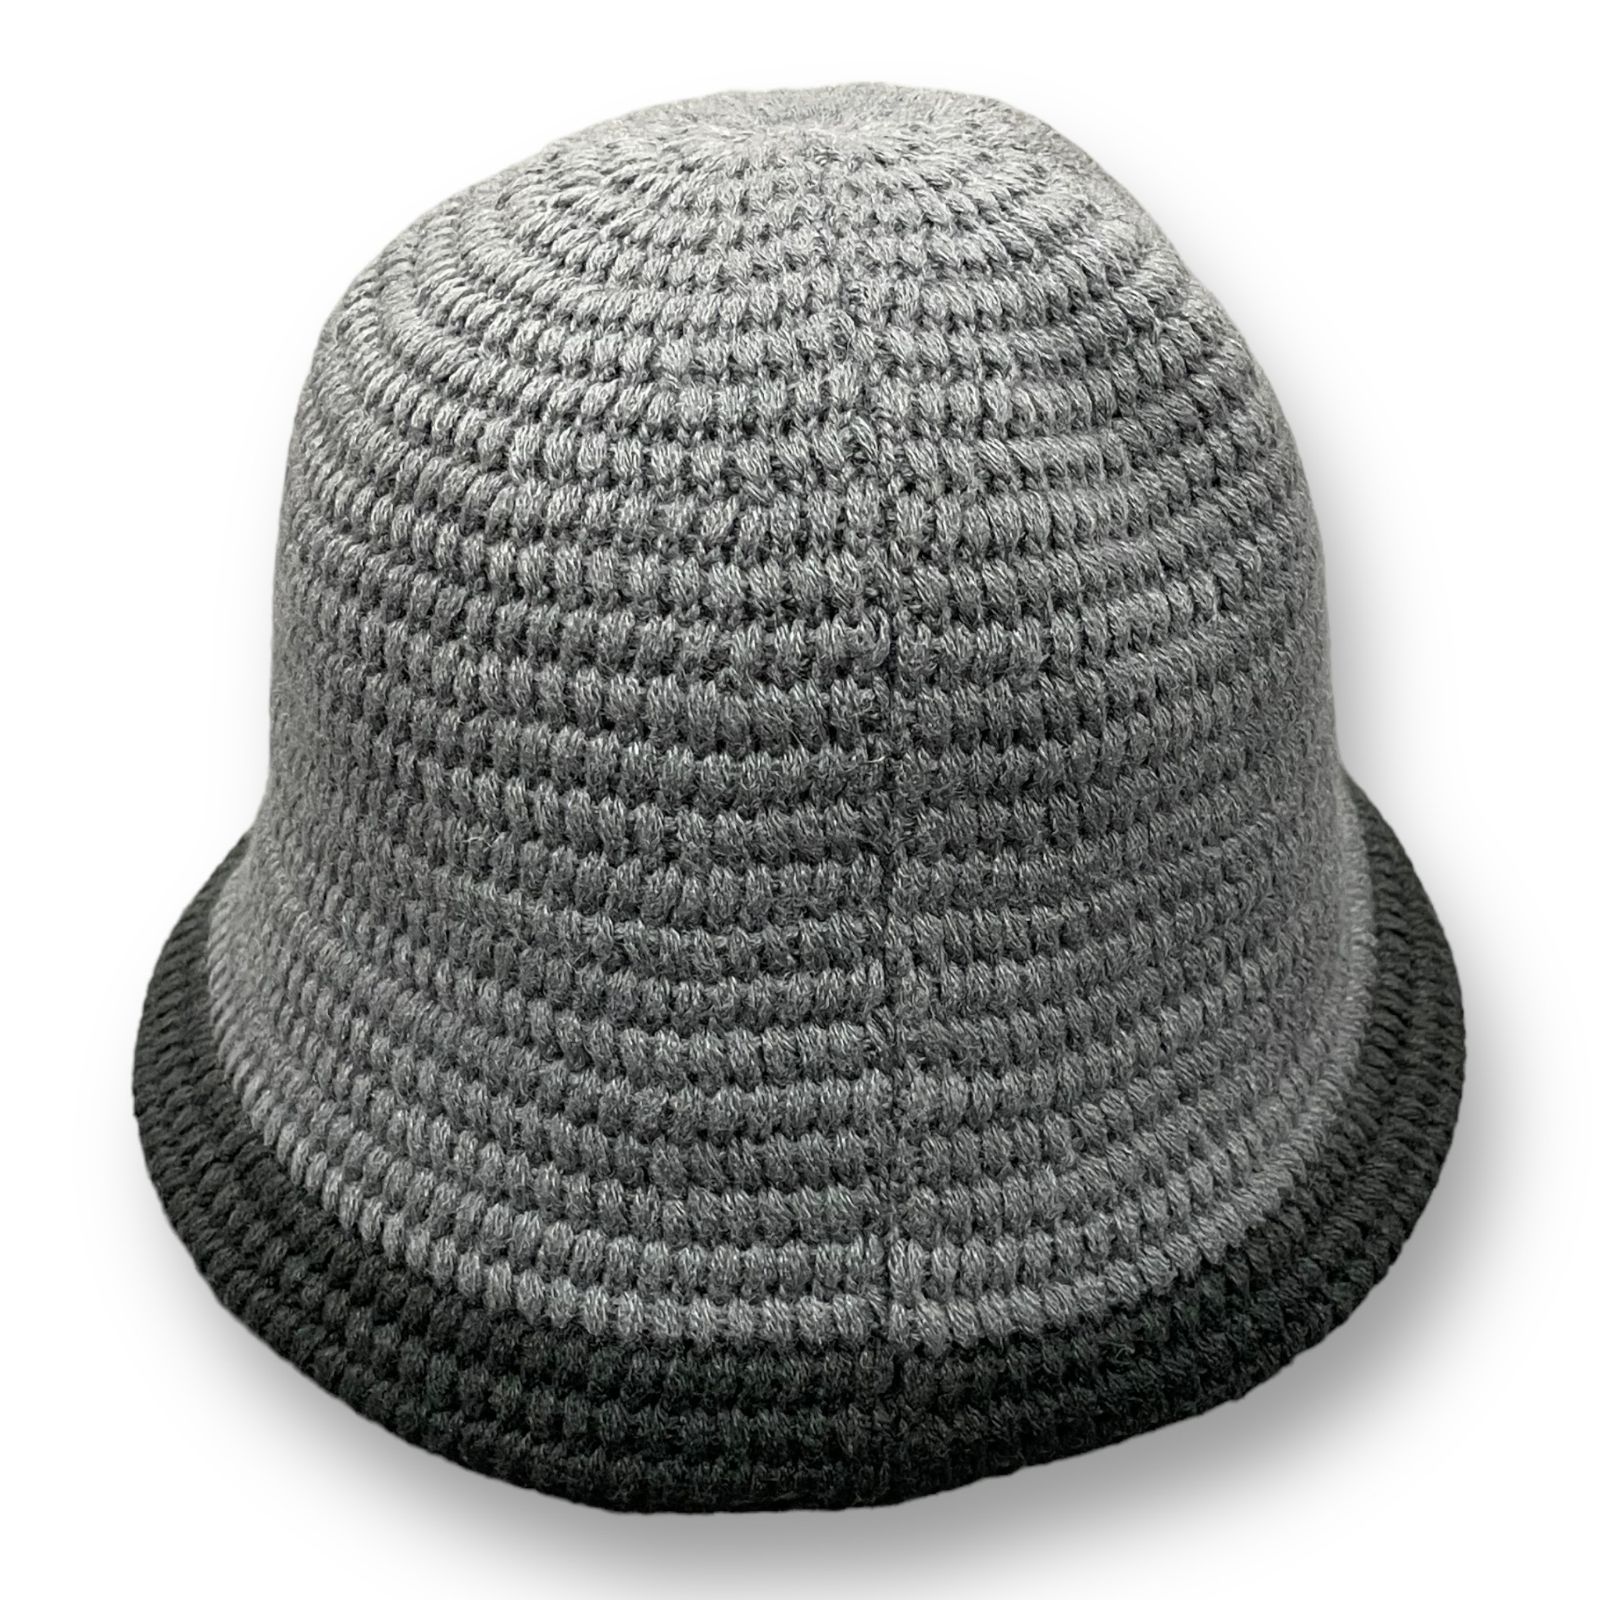 68%OFF!】 COOTIE PRODUCTIONS Knit Crusher Hat